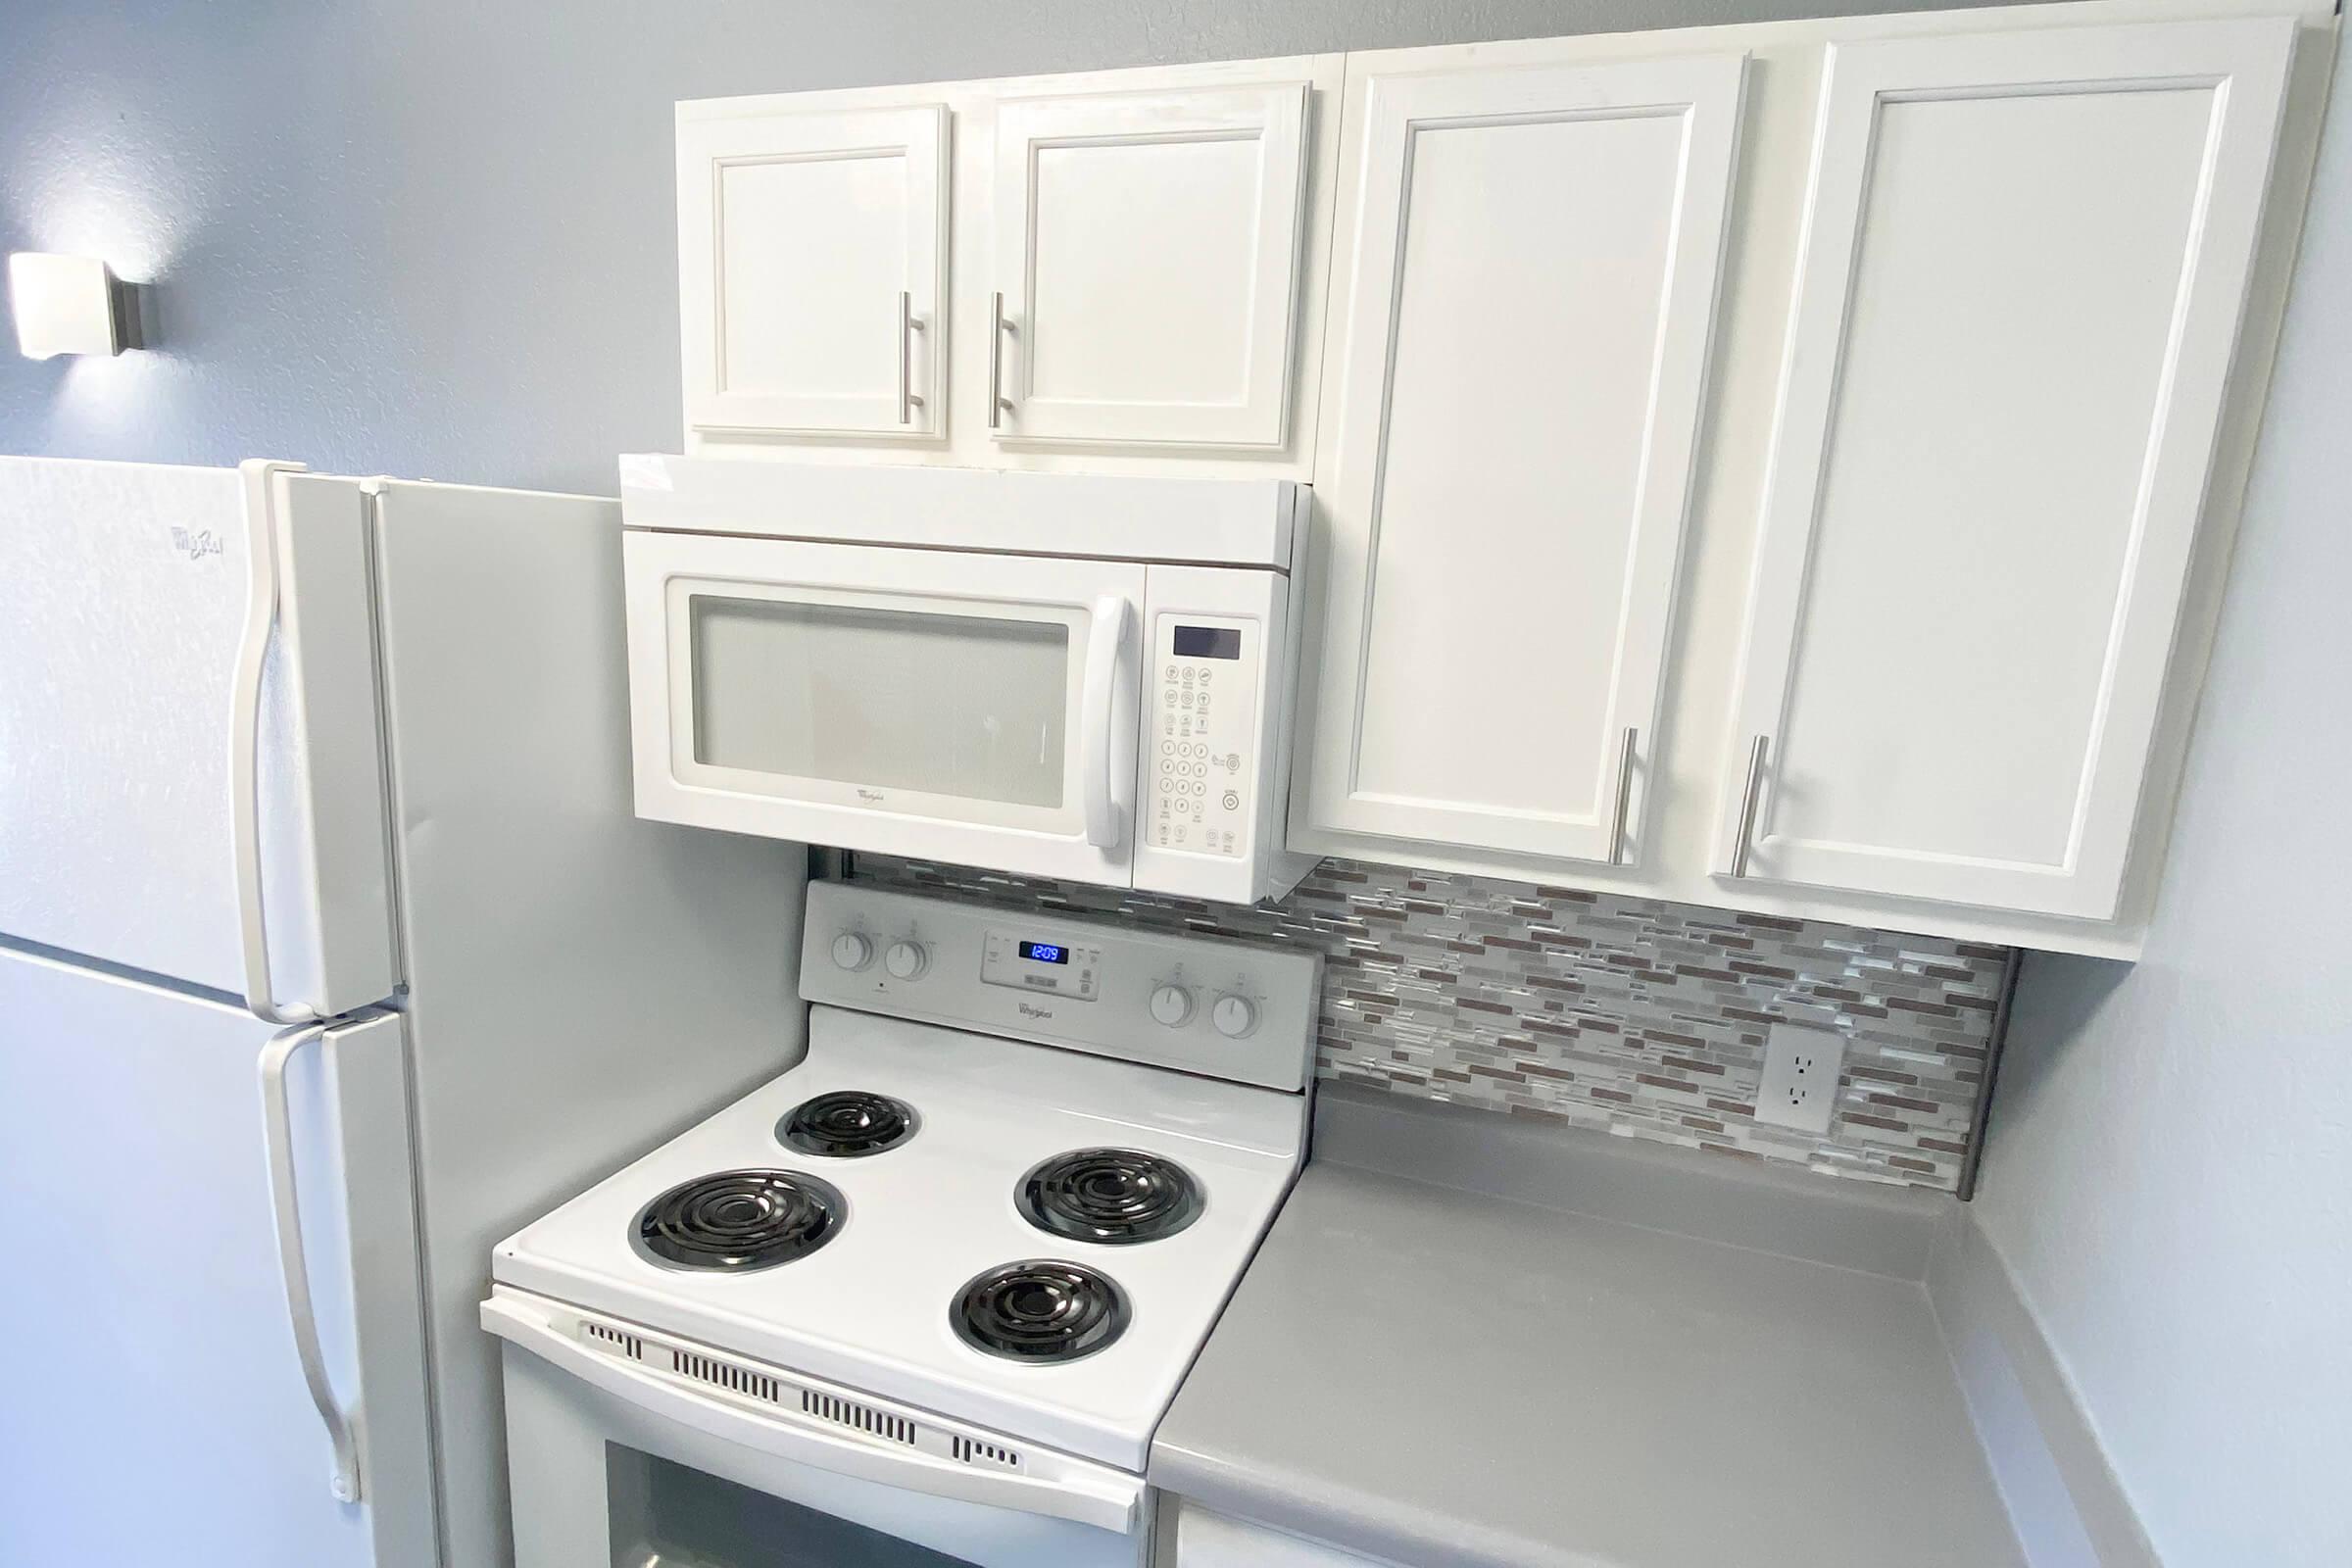 a microwave oven sitting on top of a stove